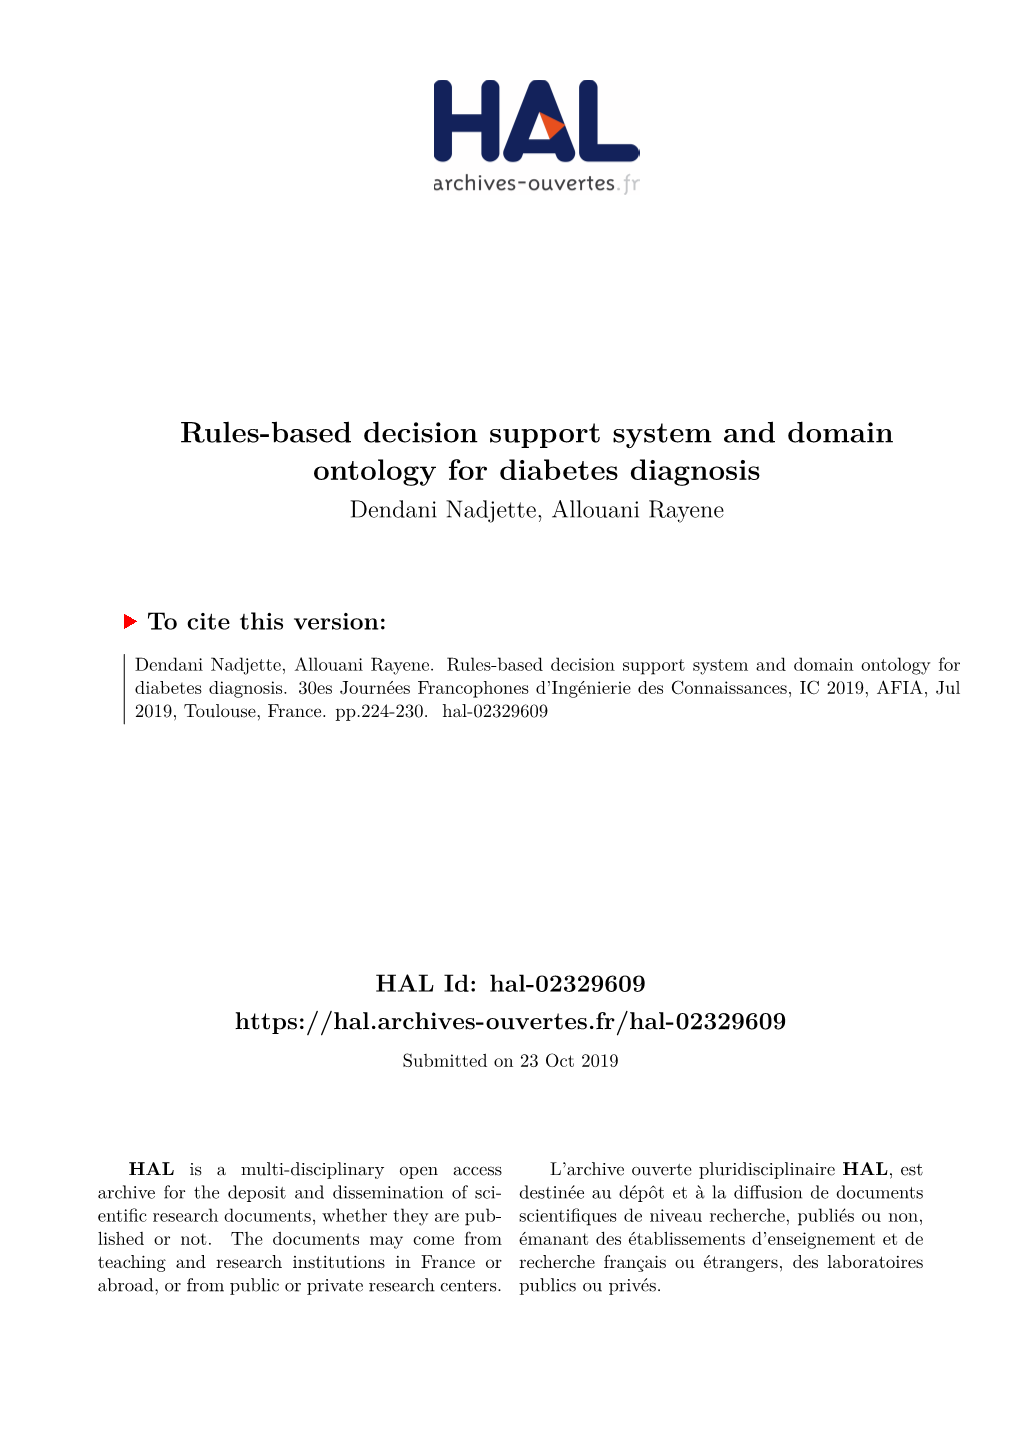 Rules-Based Decision Support System and Domain Ontology for Diabetes Diagnosis Dendani Nadjette, Allouani Rayene